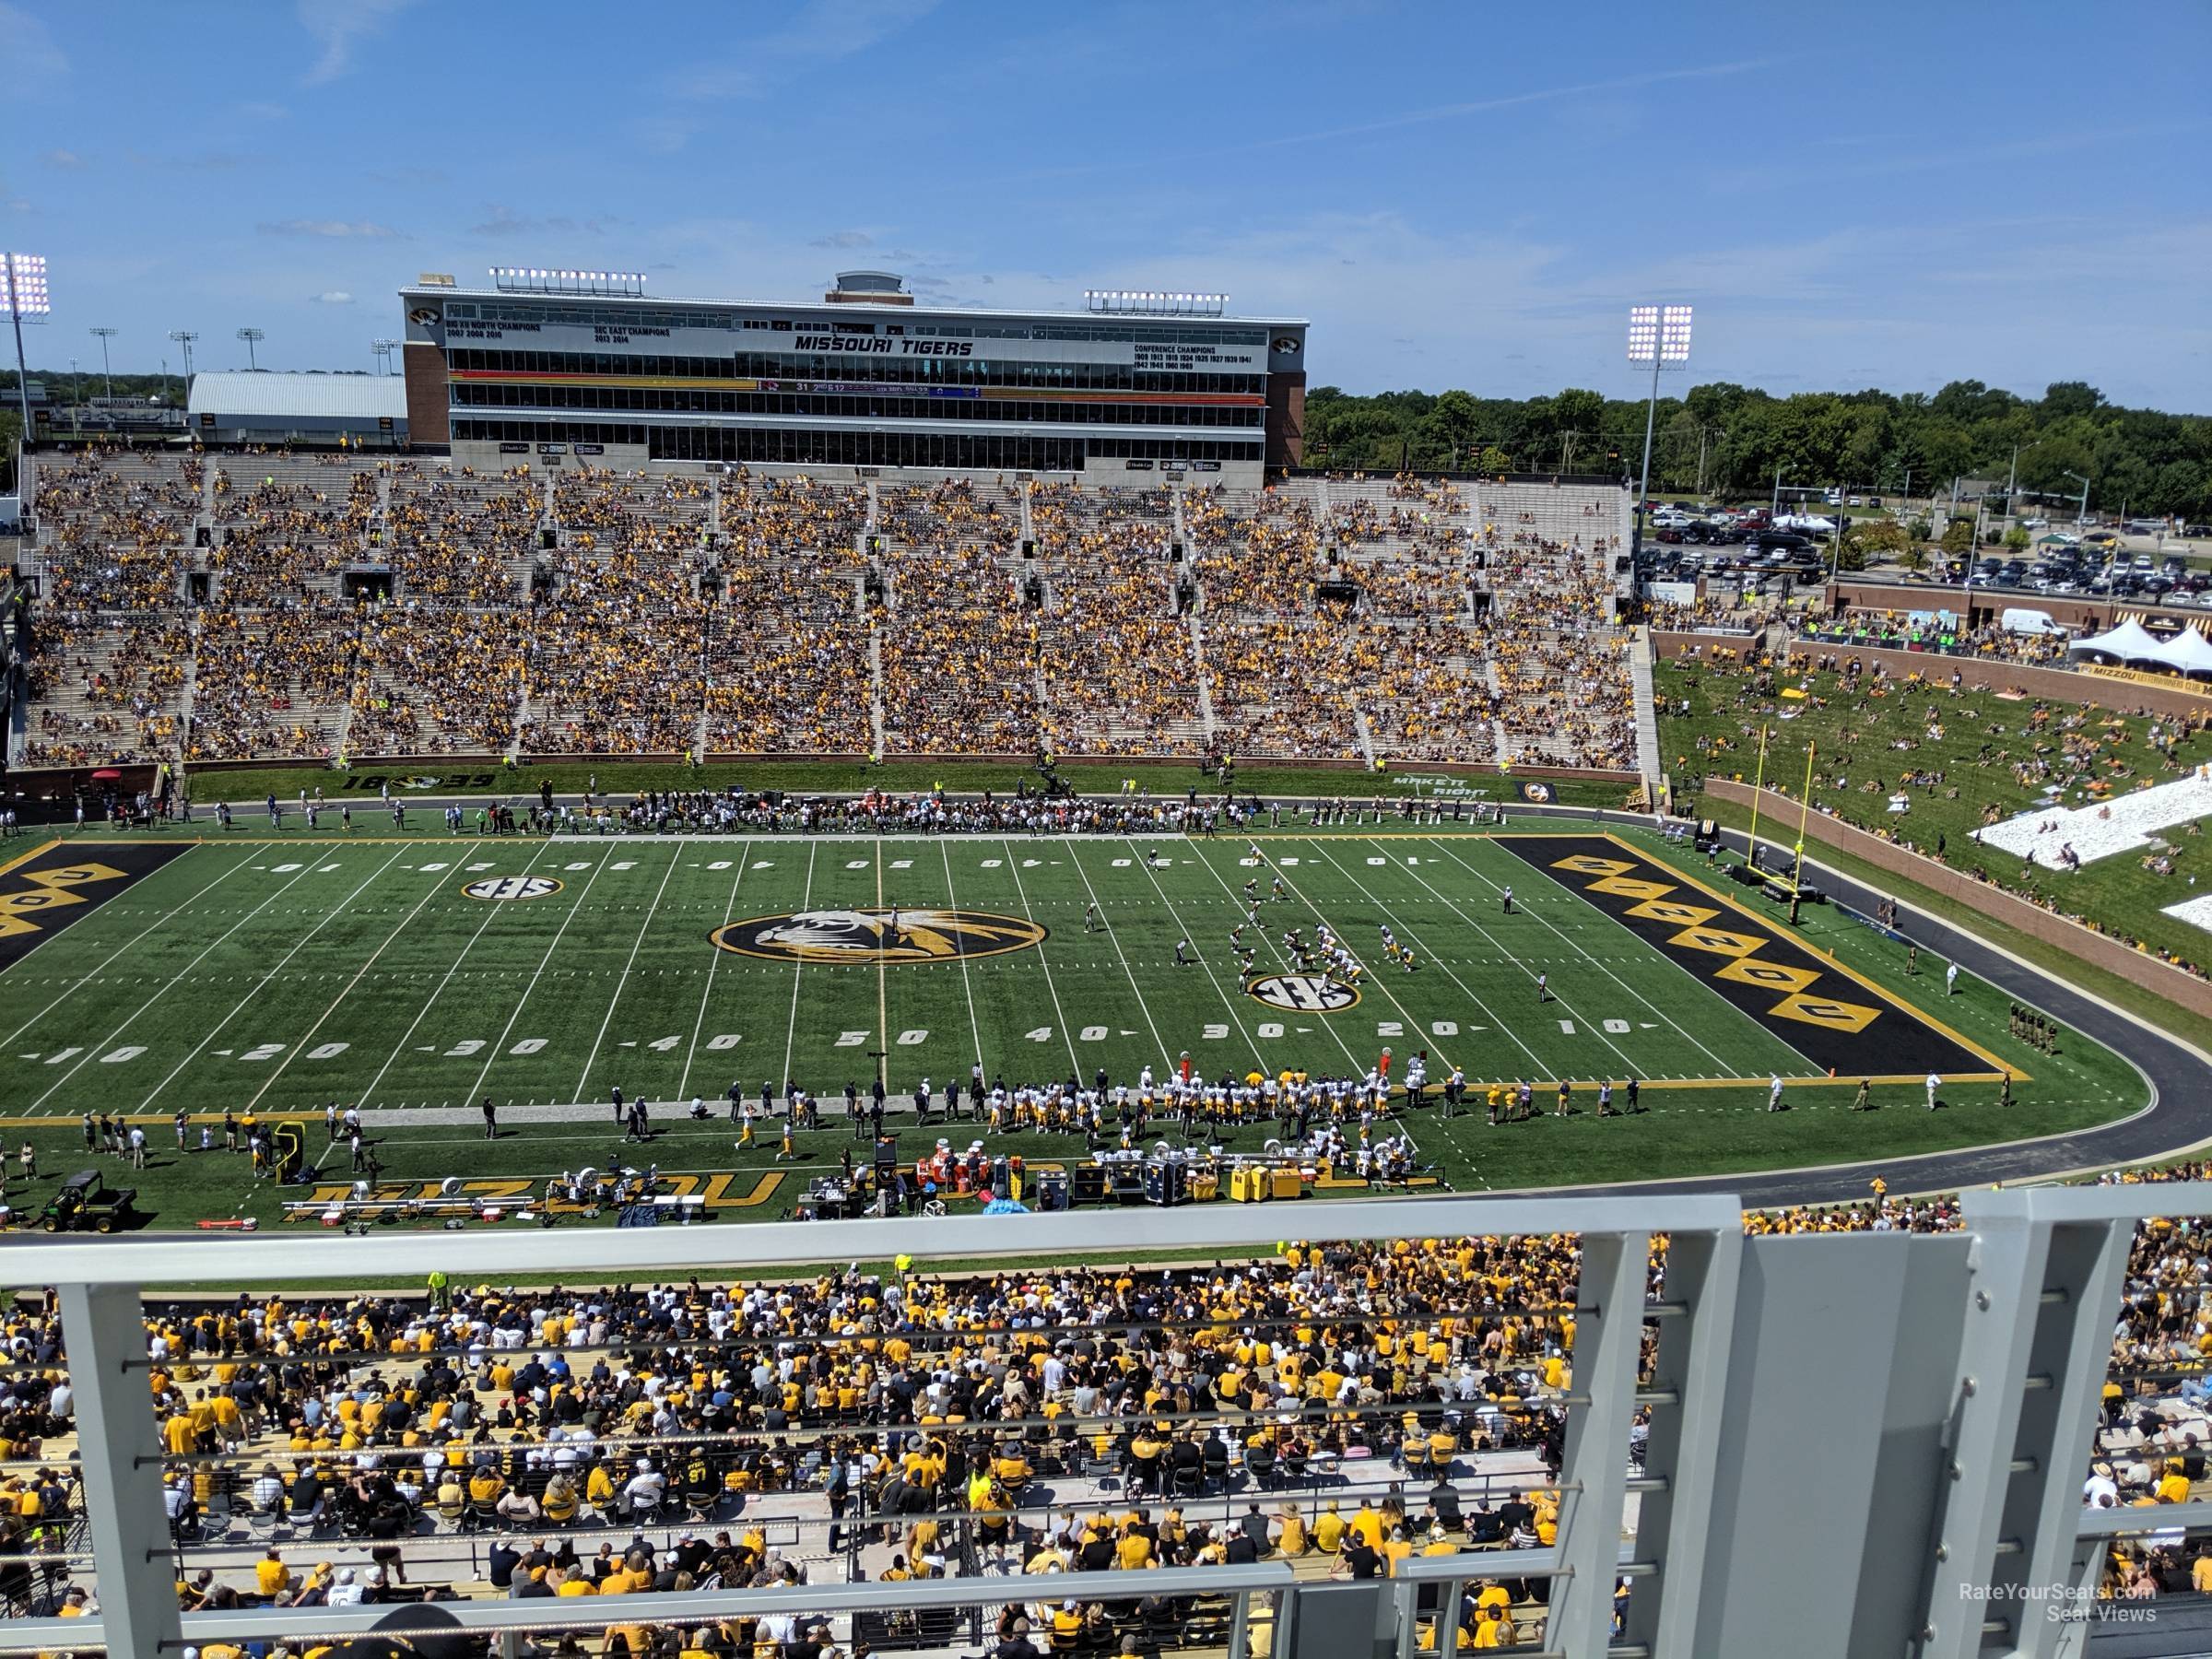 section 308, row 4 seat view  - faurot field